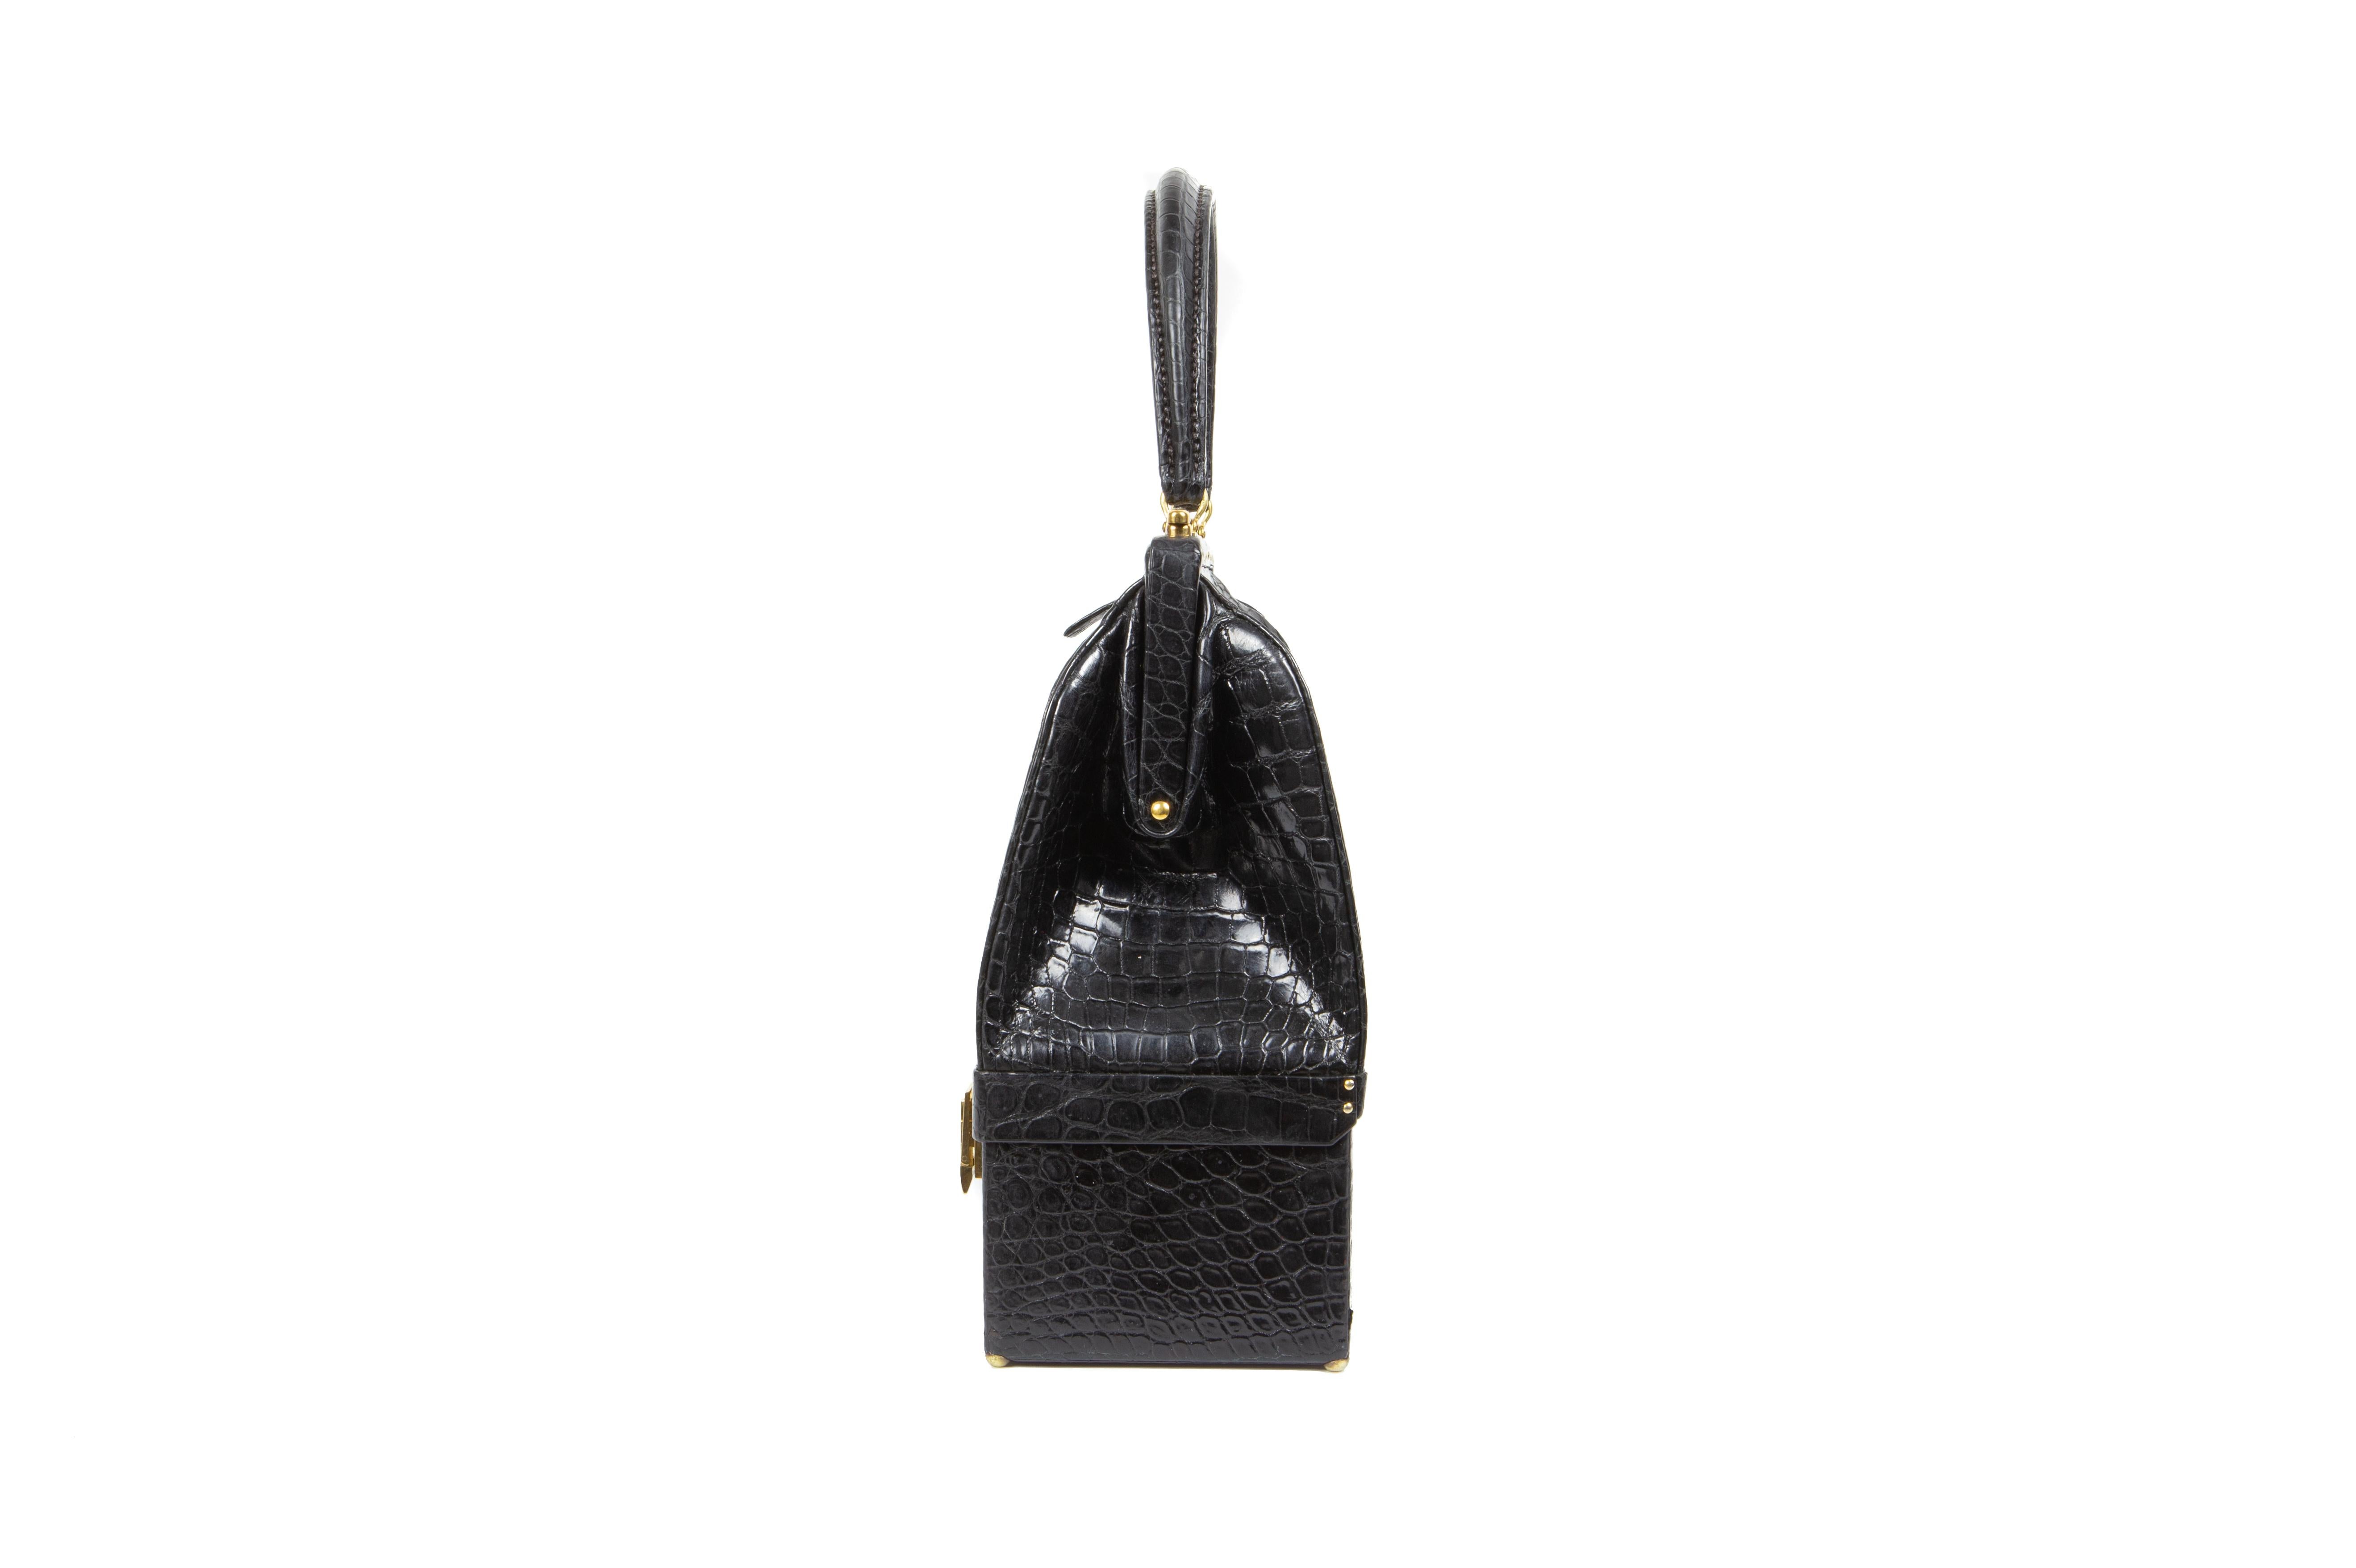 An understated, rare and highly collectable early 1970s Hermes black porosus crocodile Sac Malette with self-piping, comprising of one upper compartment with one gusseted tab patch pocket and one further pocket, both with press-stud closure, lined